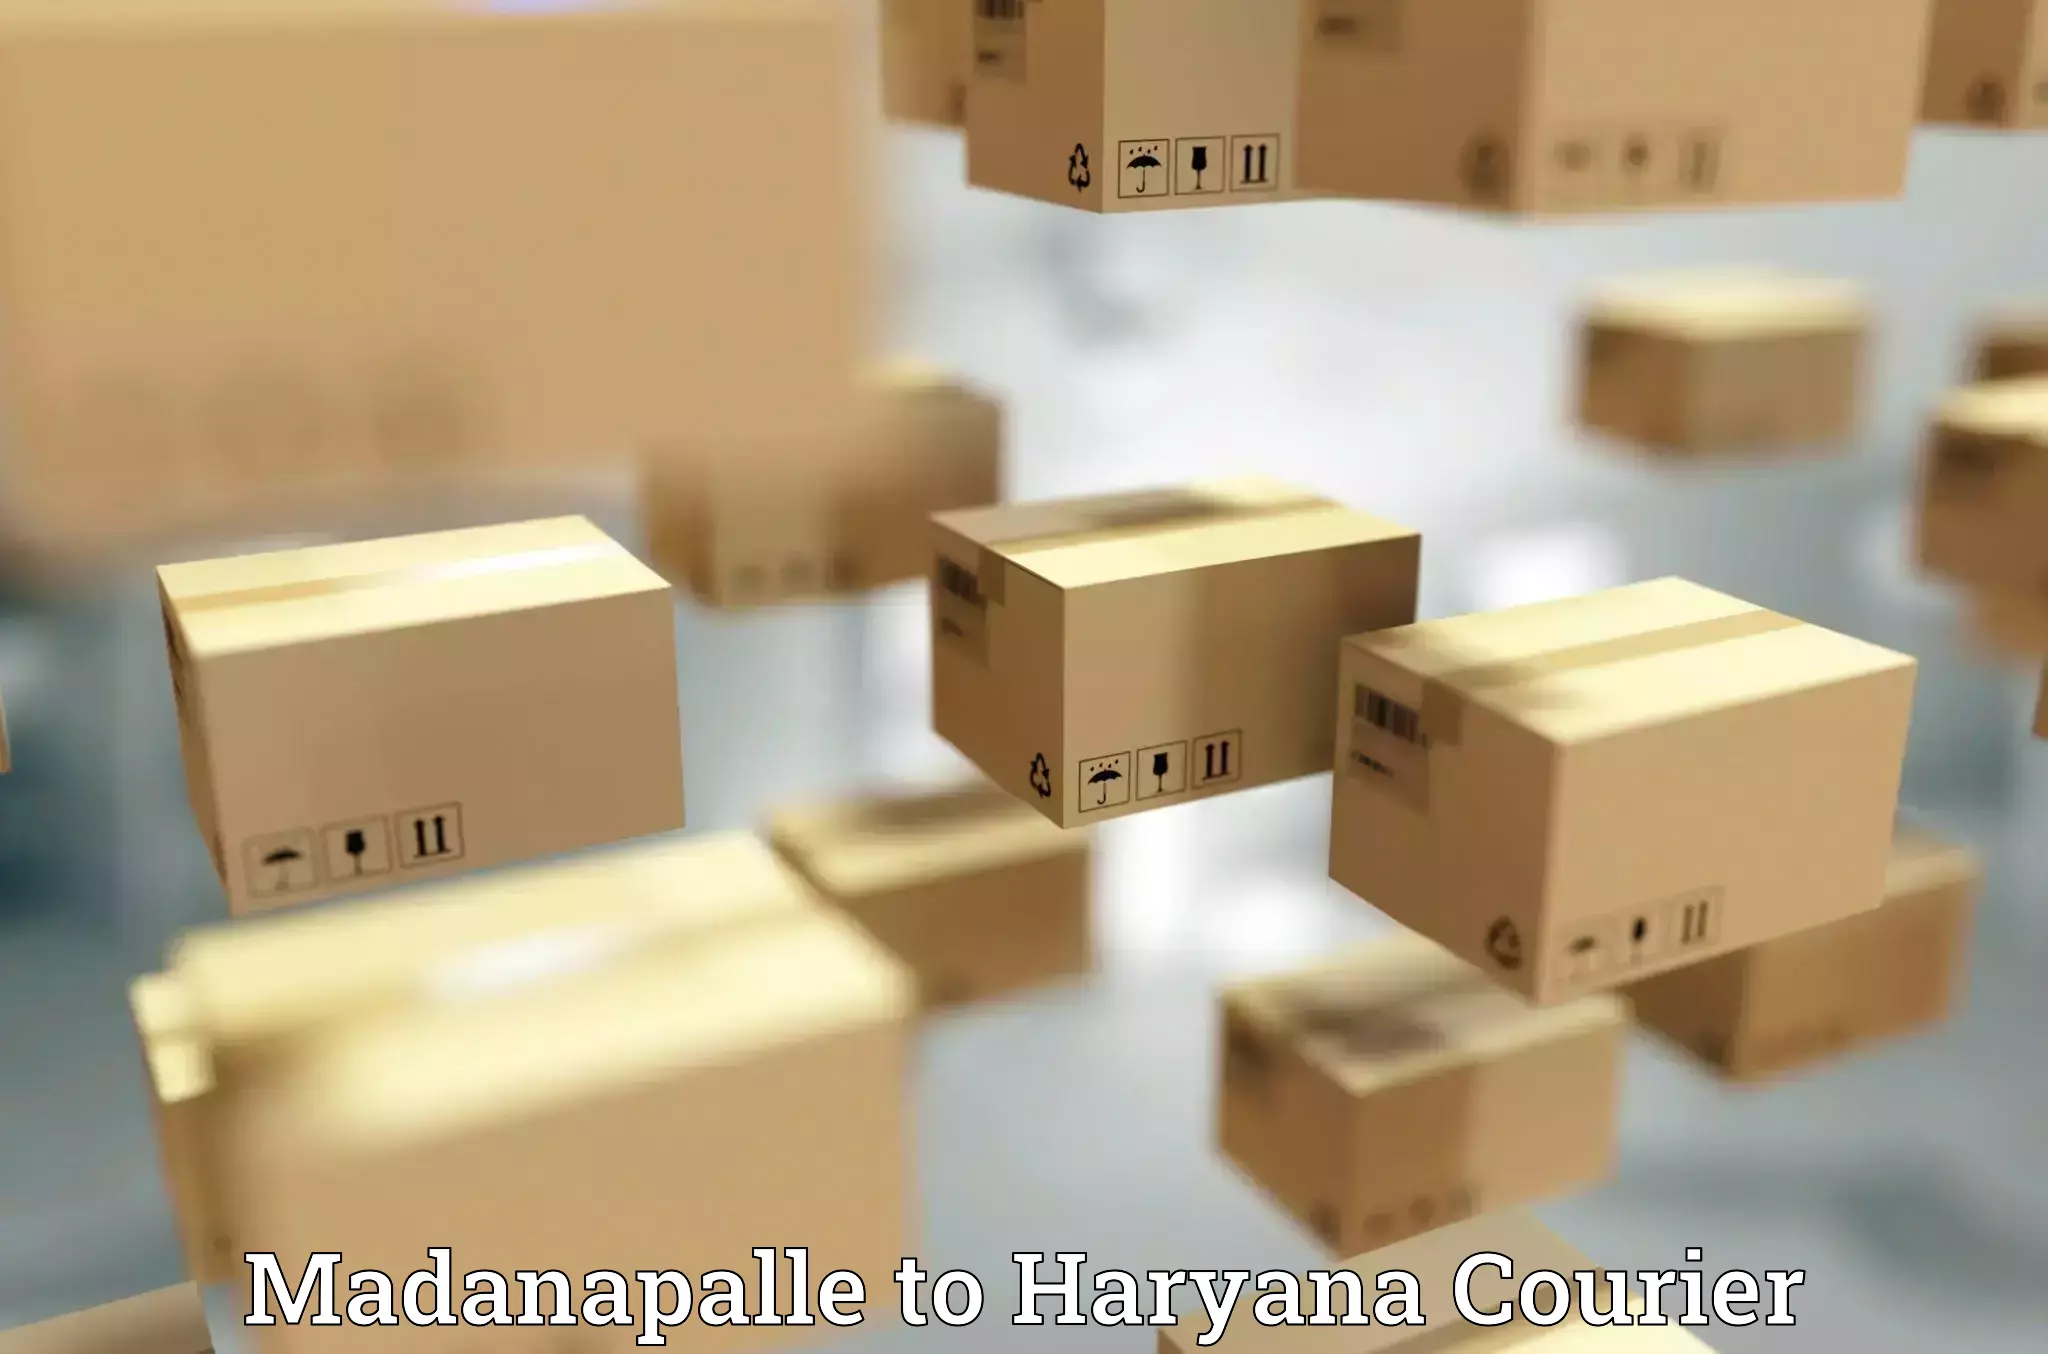 Courier service innovation Madanapalle to Chirya